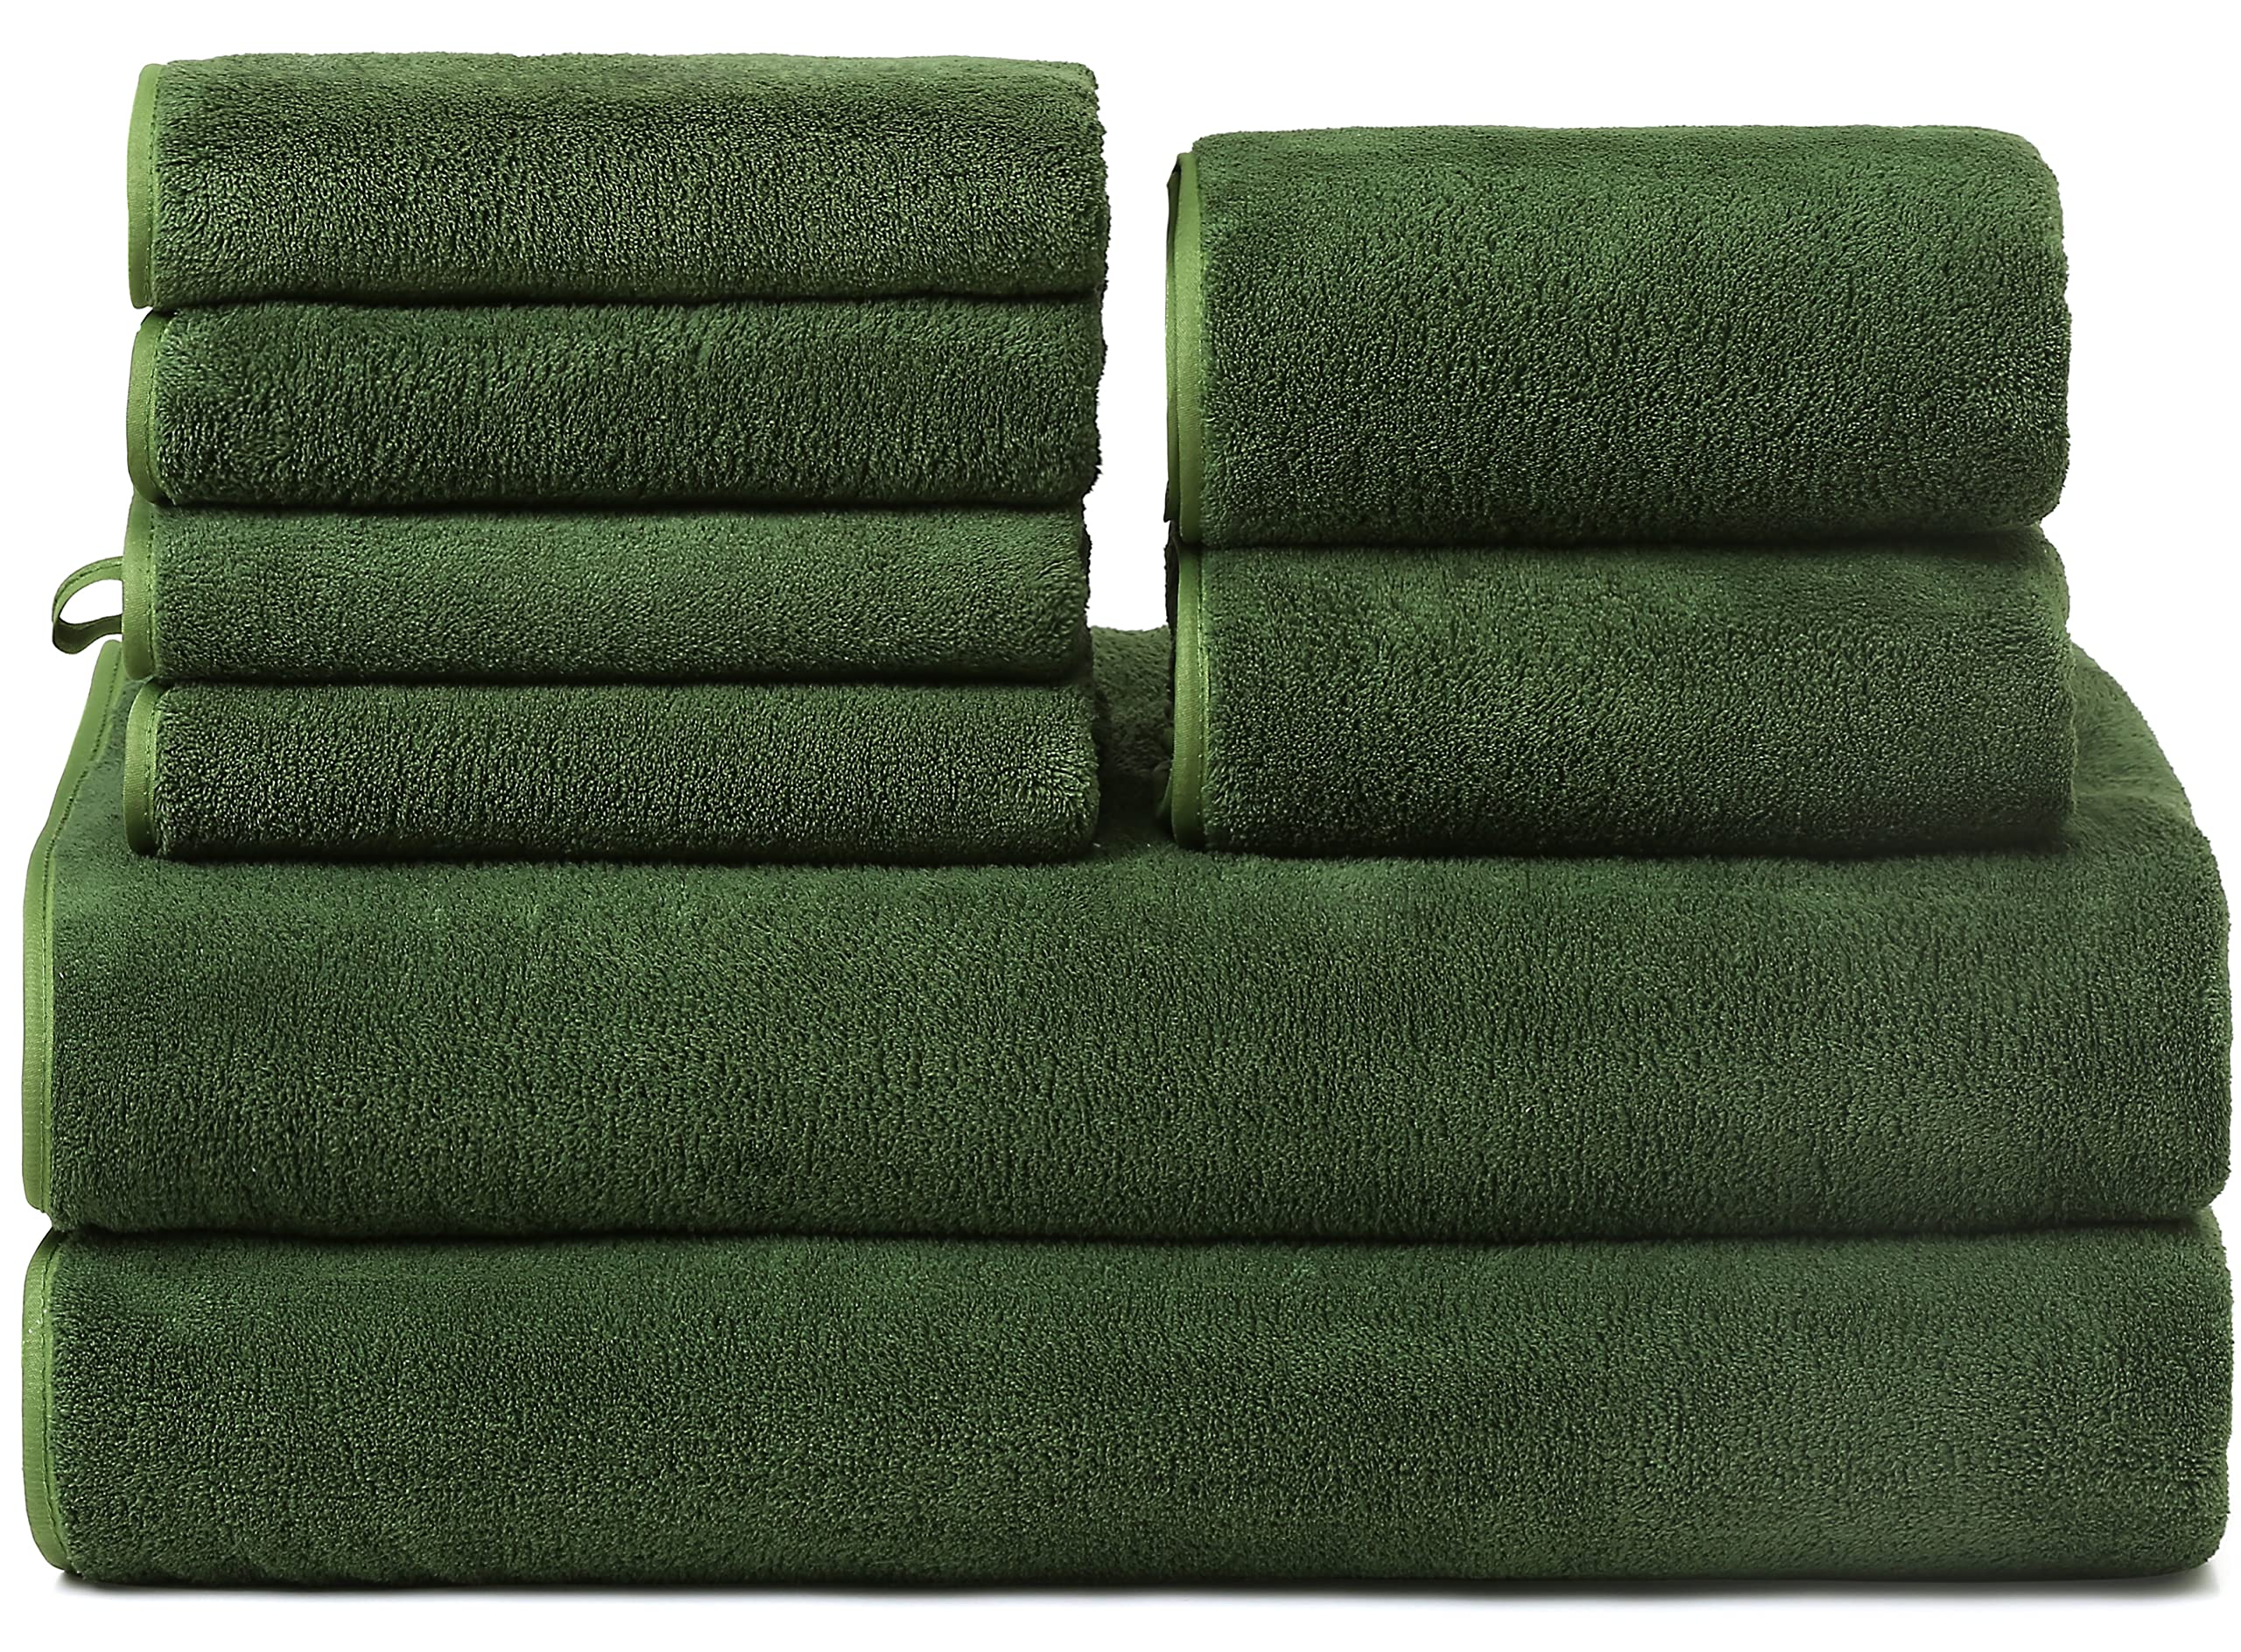 Ultra Soft Bath Towel Set of 4, Green Extra Large Textured Microfiber  Luxury Towels 35x70 in, Quick Dry, Highly Absorbent, Fluffy, Oversized, for